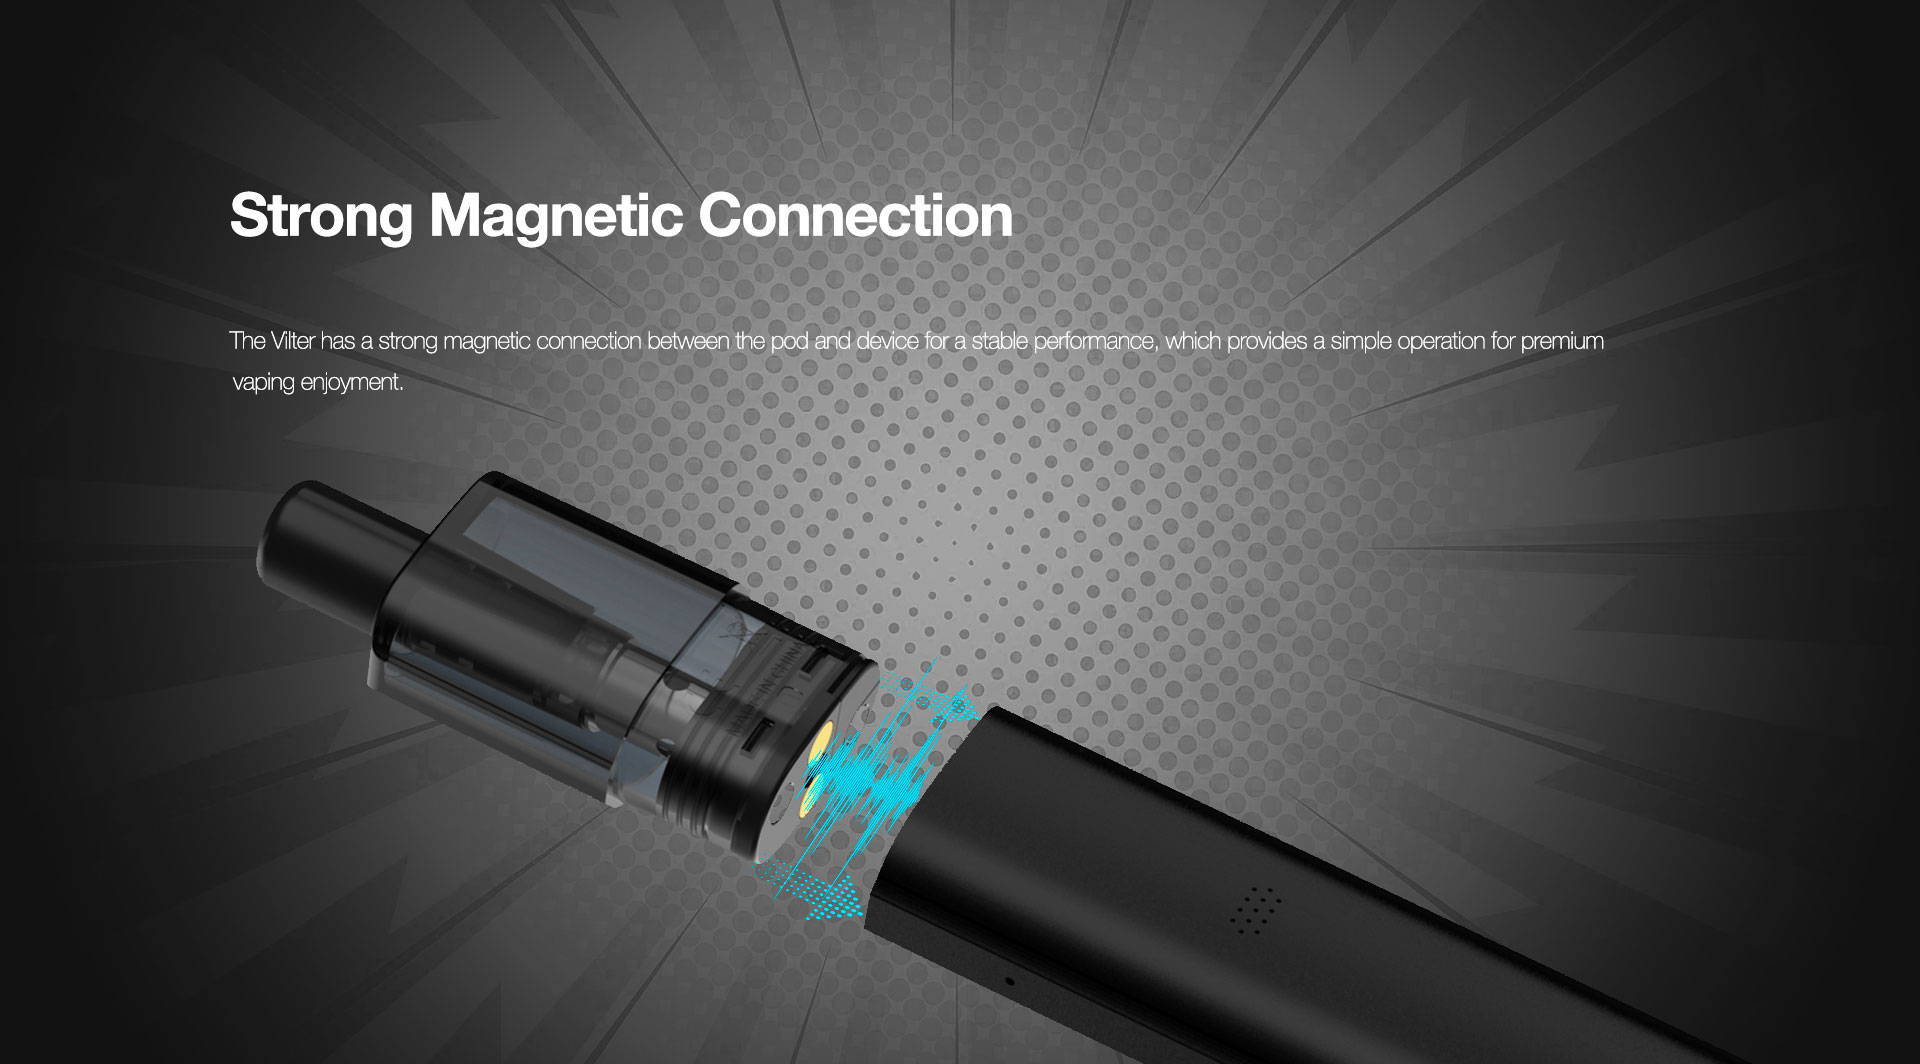 Strong Magnetic Connection  The Vilter has a strong magnetic connection between the pod and device for a stable performance, which provides a simple operation for premium vaping enjoyment.